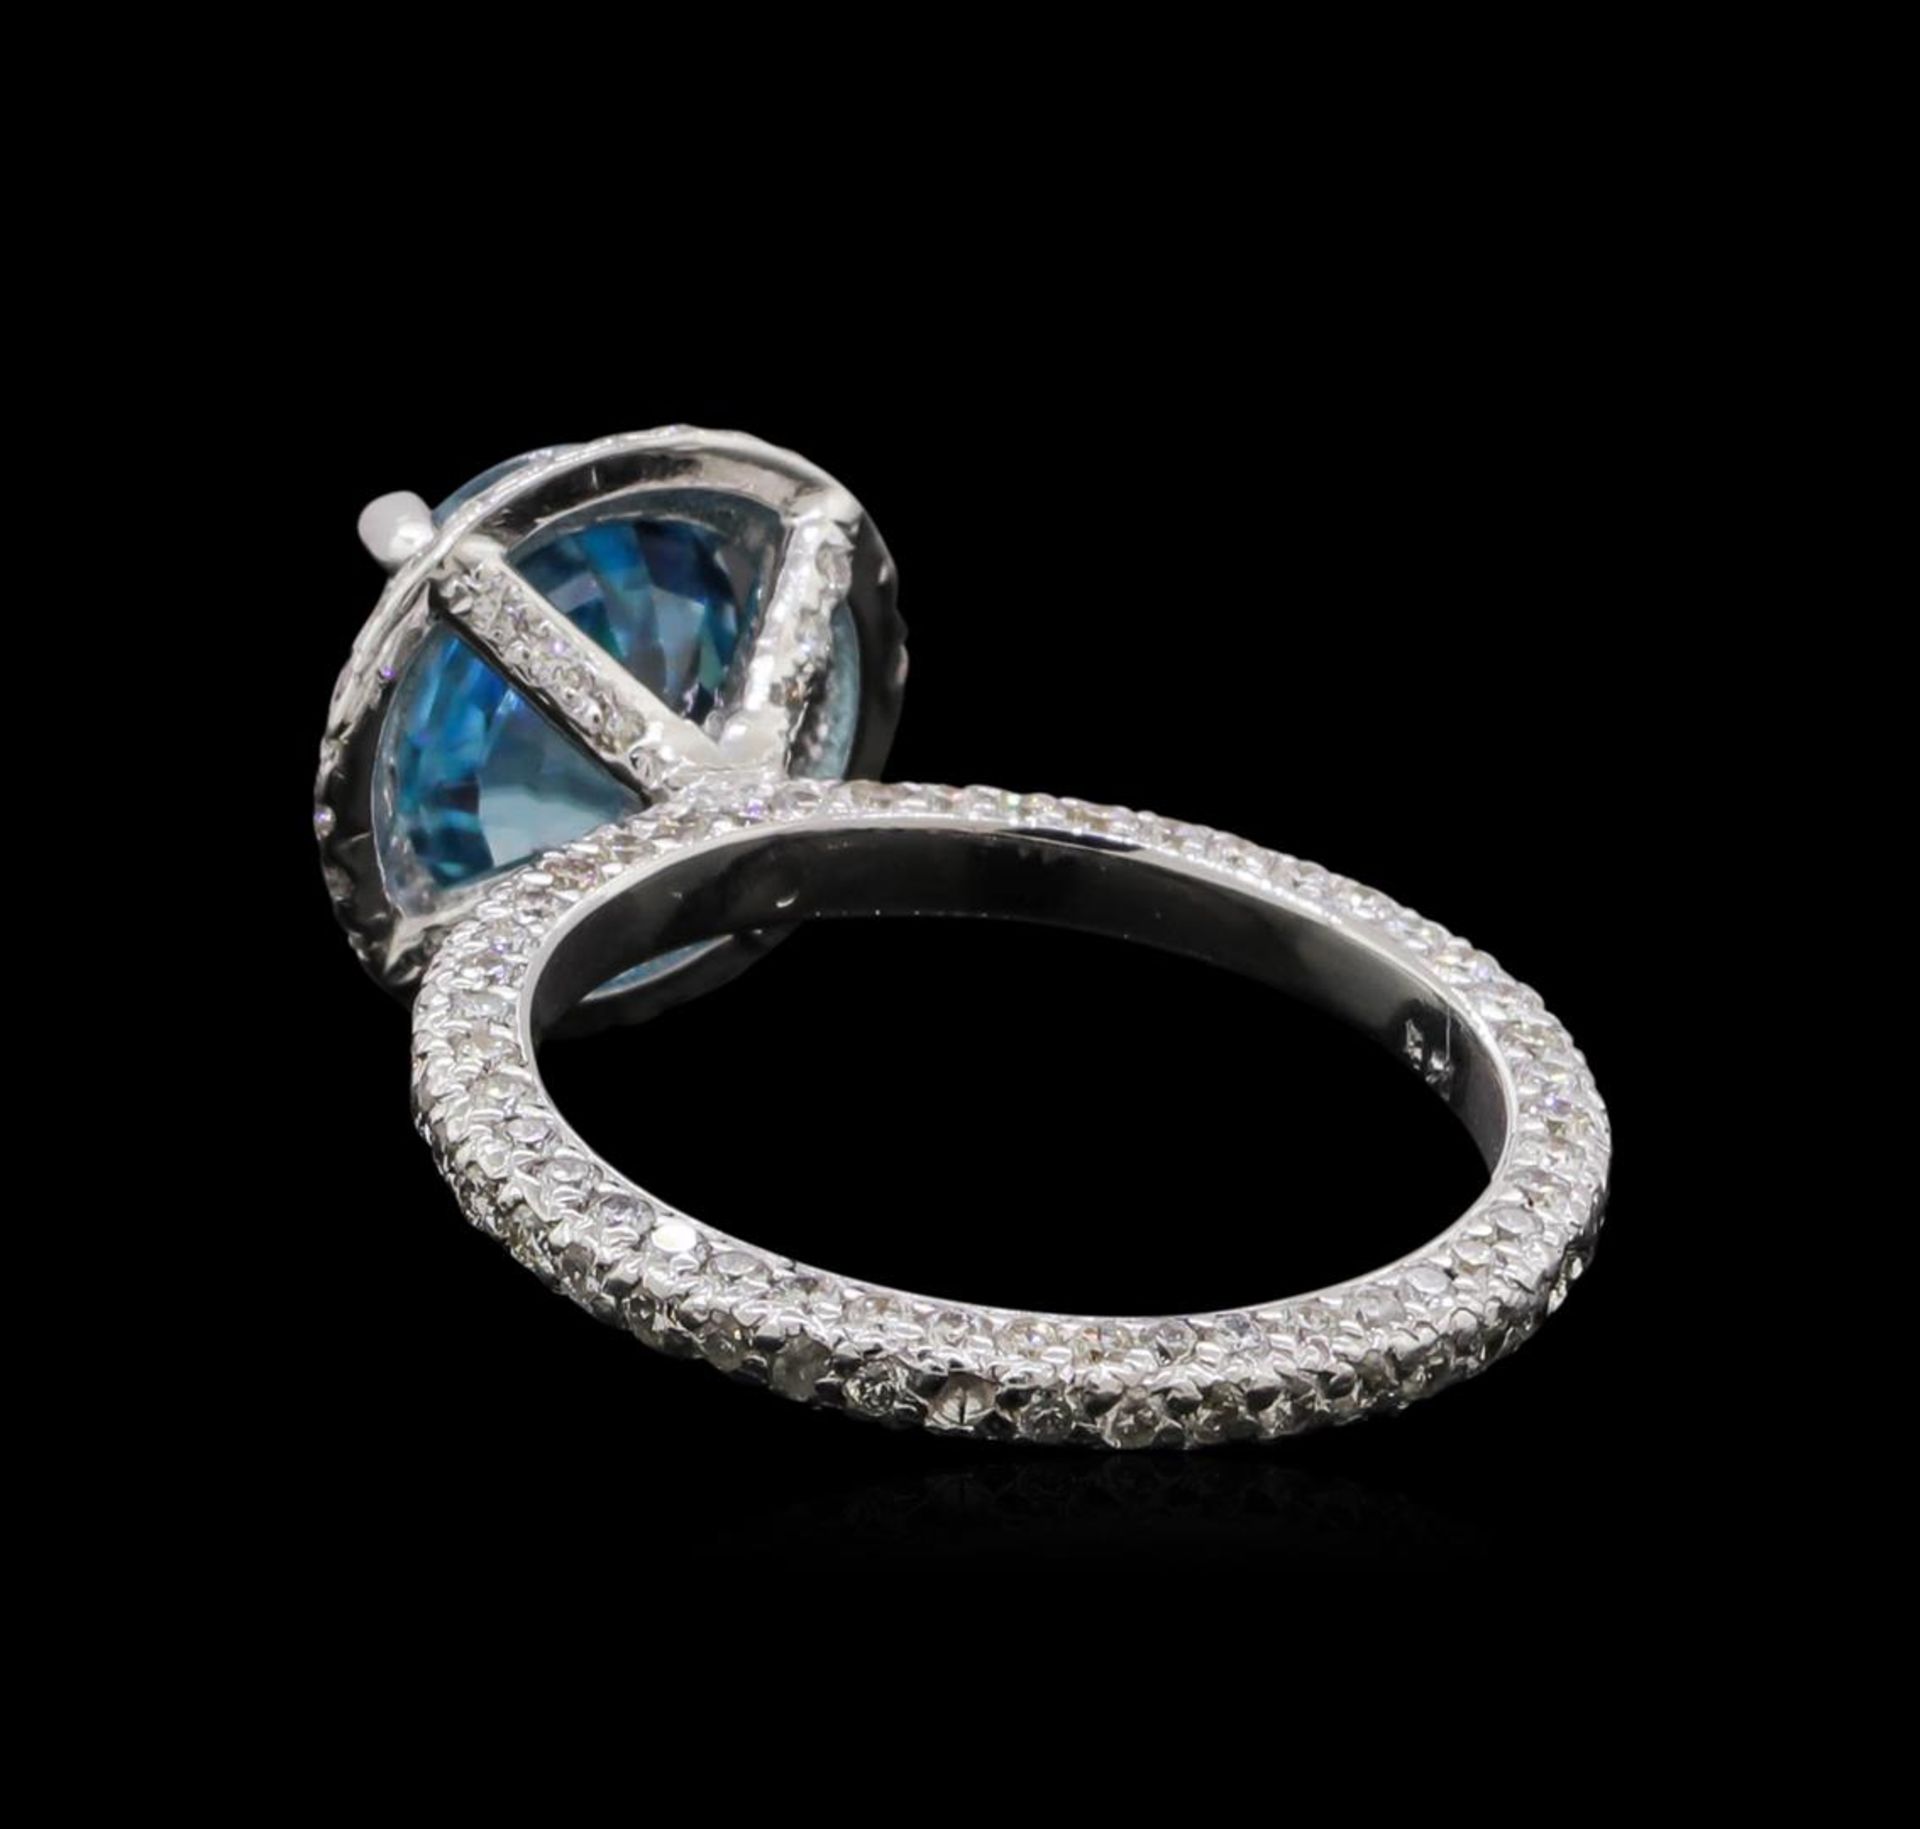 4.23 ctw Blue Zircon and Diamond Ring - 14KT White Gold - Image 3 of 5